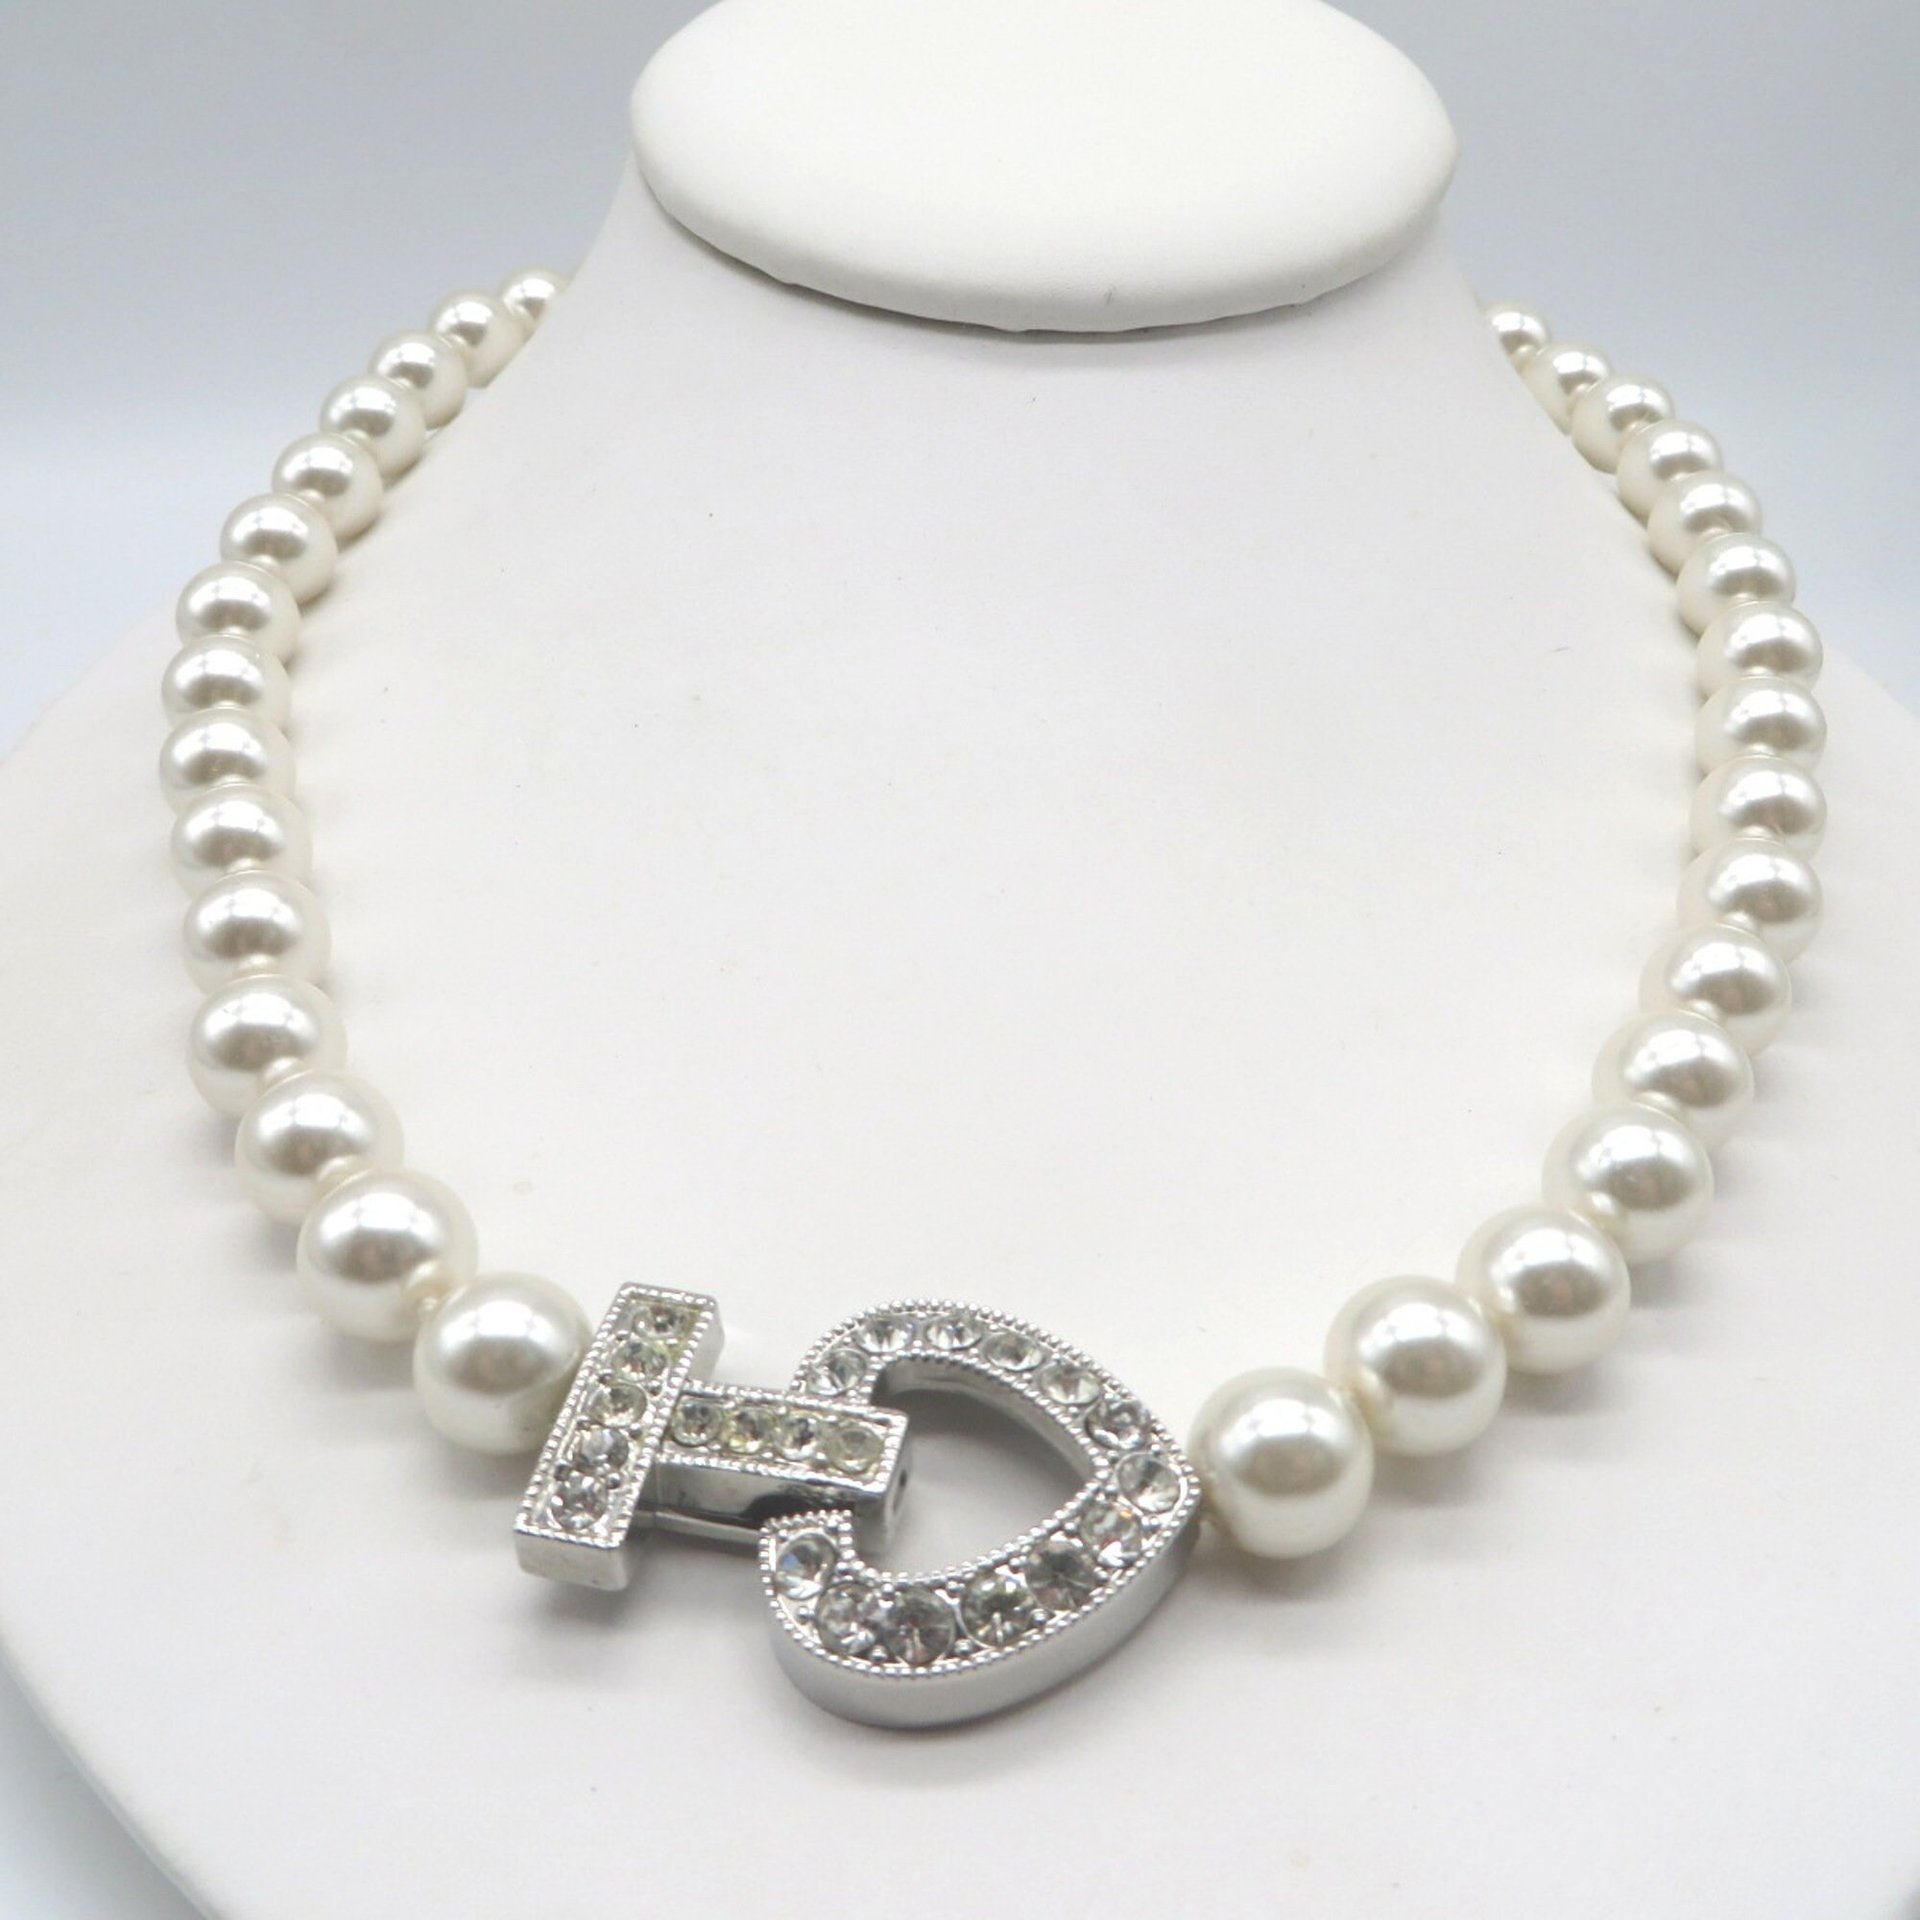 Chunky Faux Pearl and Rhinestone Necklace